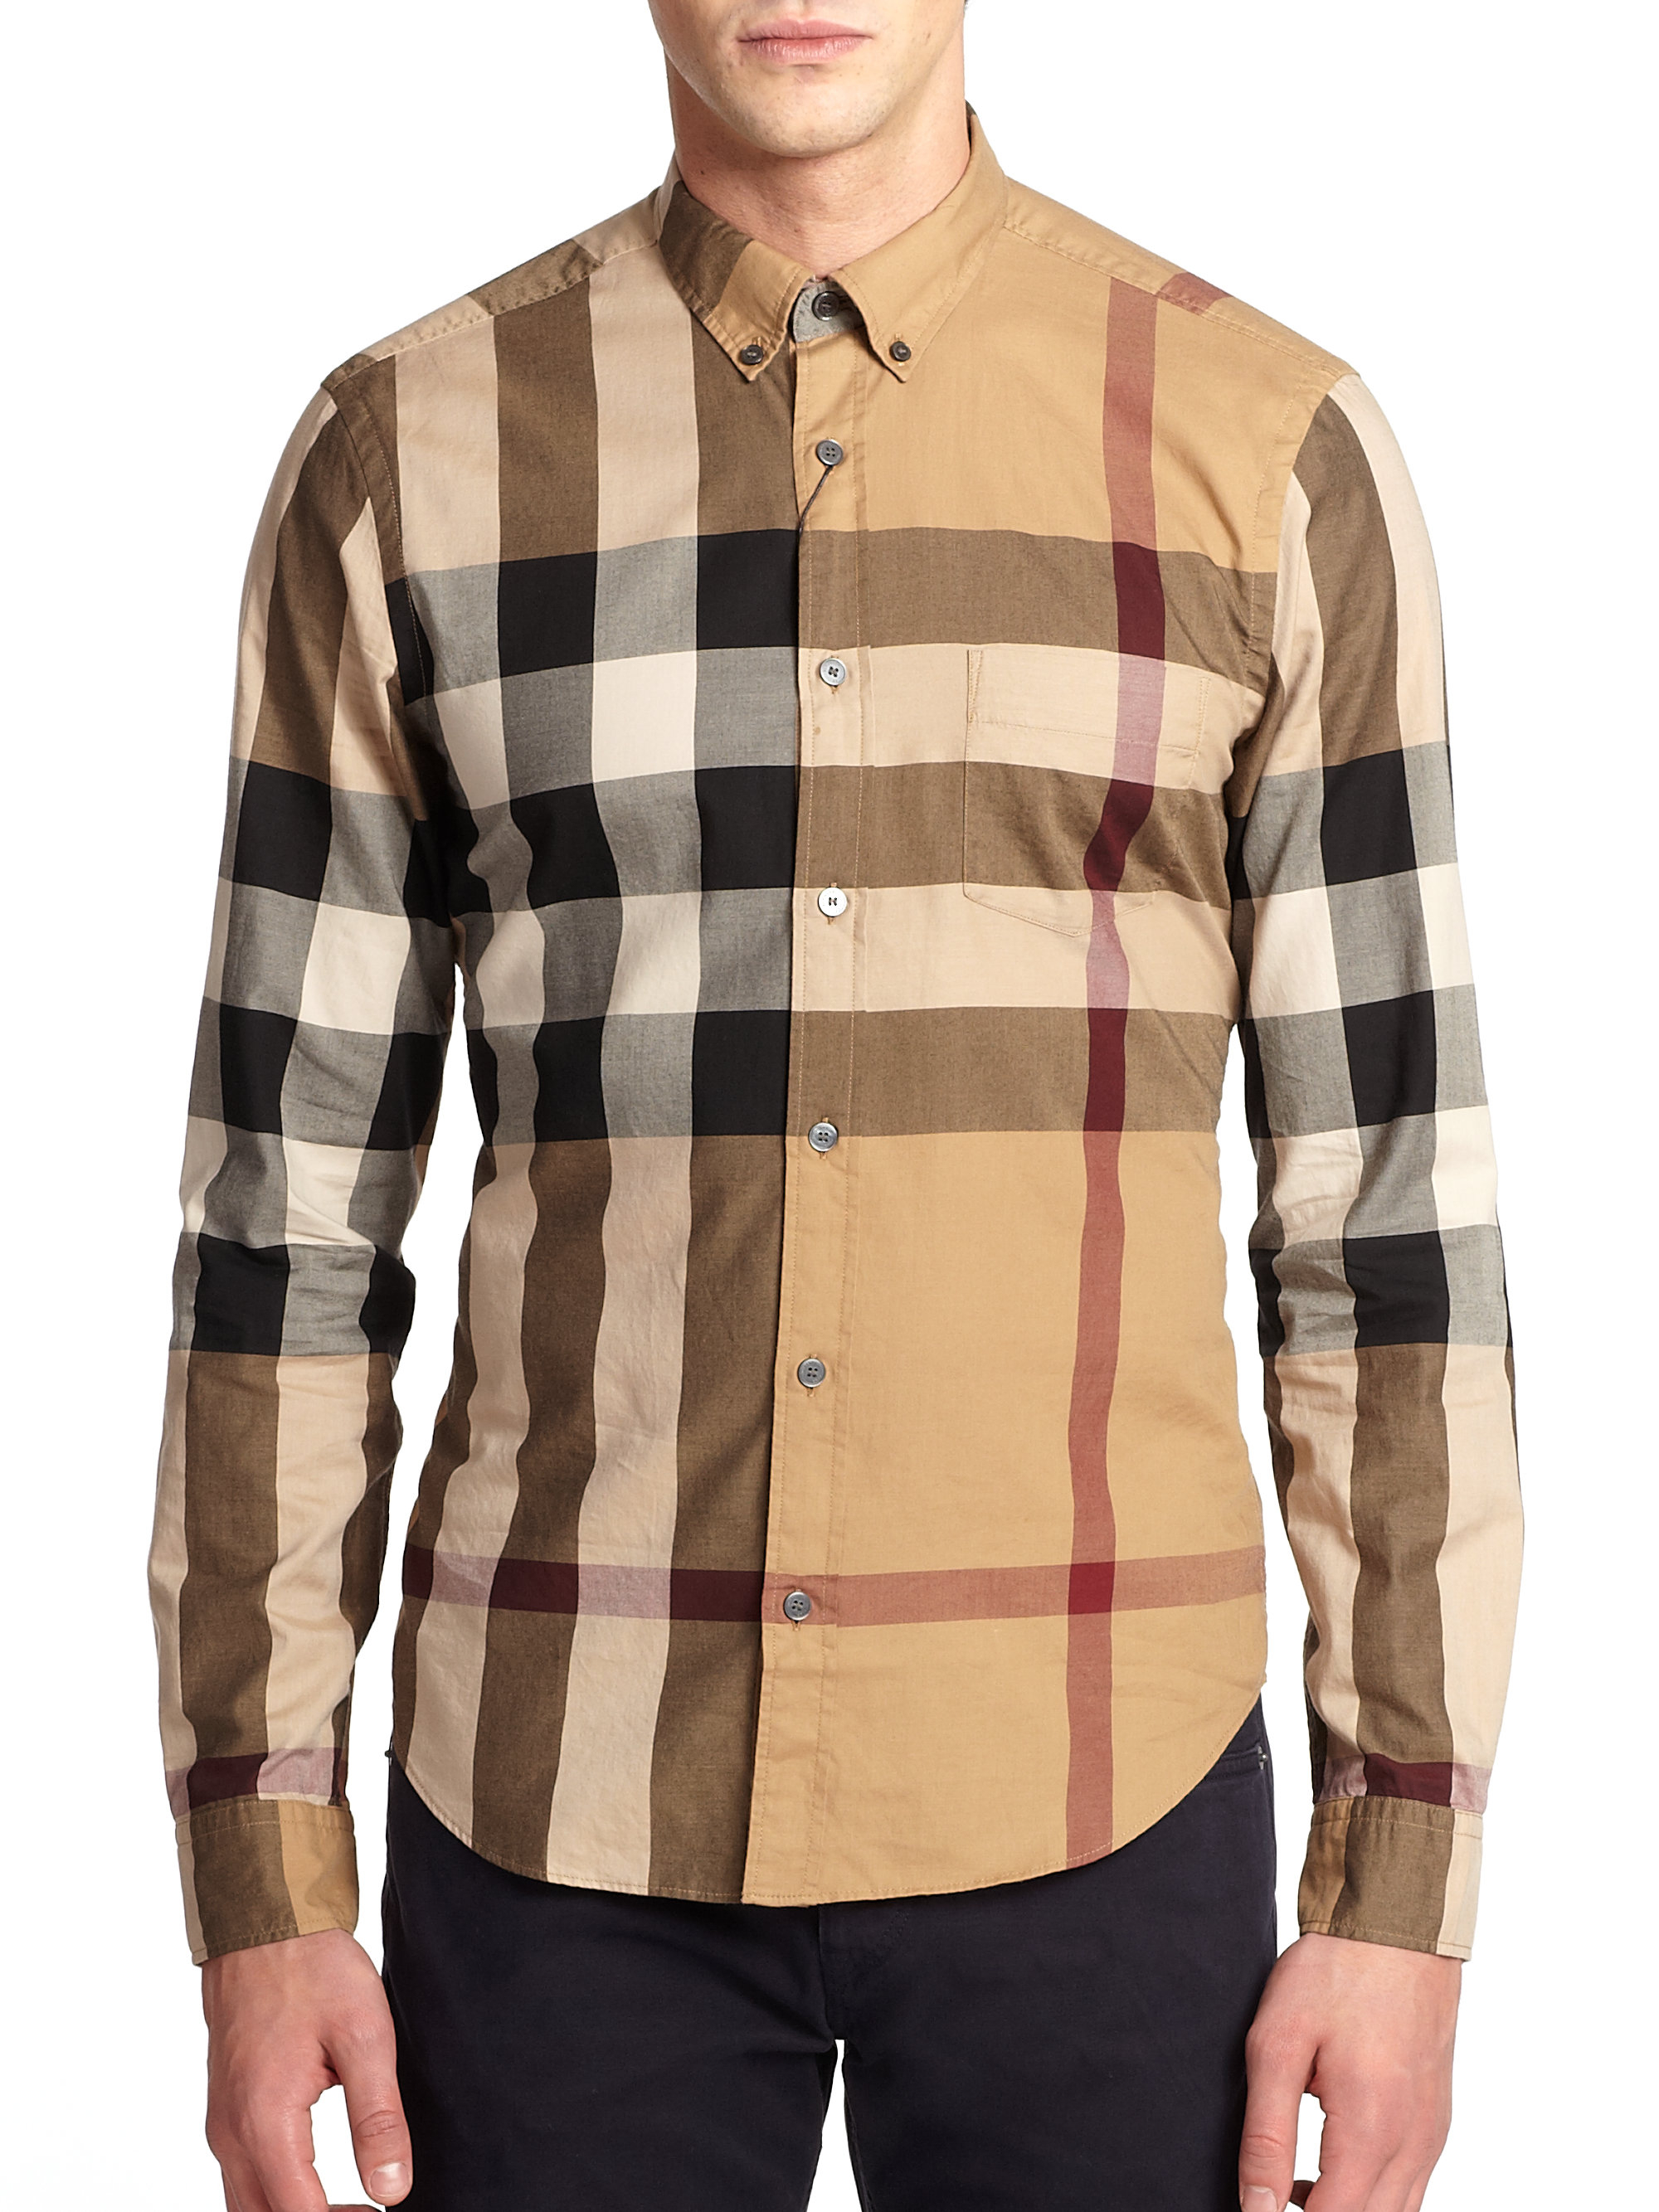 Lyst - Burberry Brit Fred Check Cotton Shirt in Natural for Men